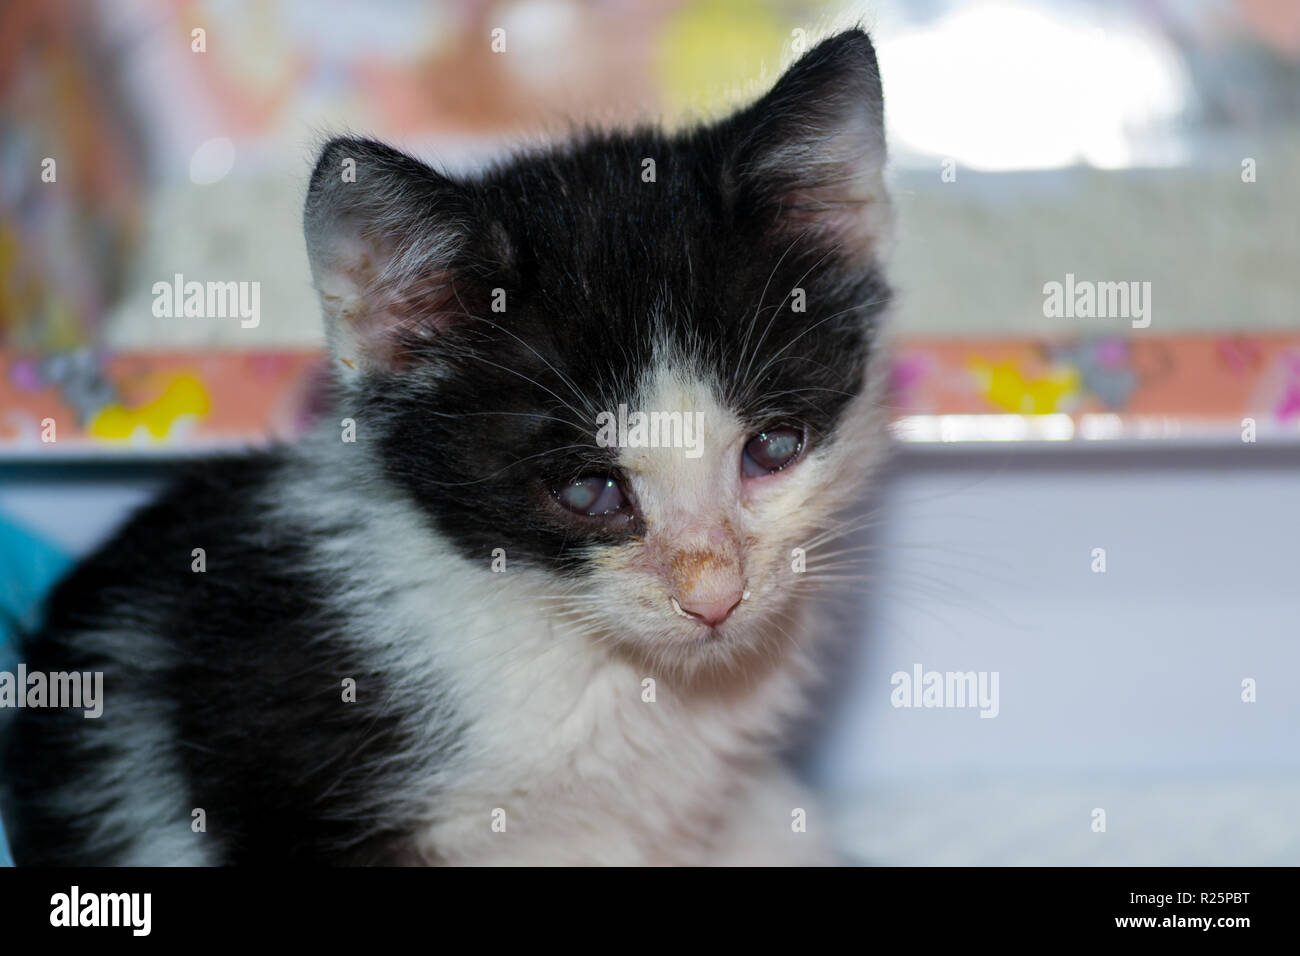 Kitten with conjunctivitis and corneal ulcer afte infection with herpesvirus Stock Photo